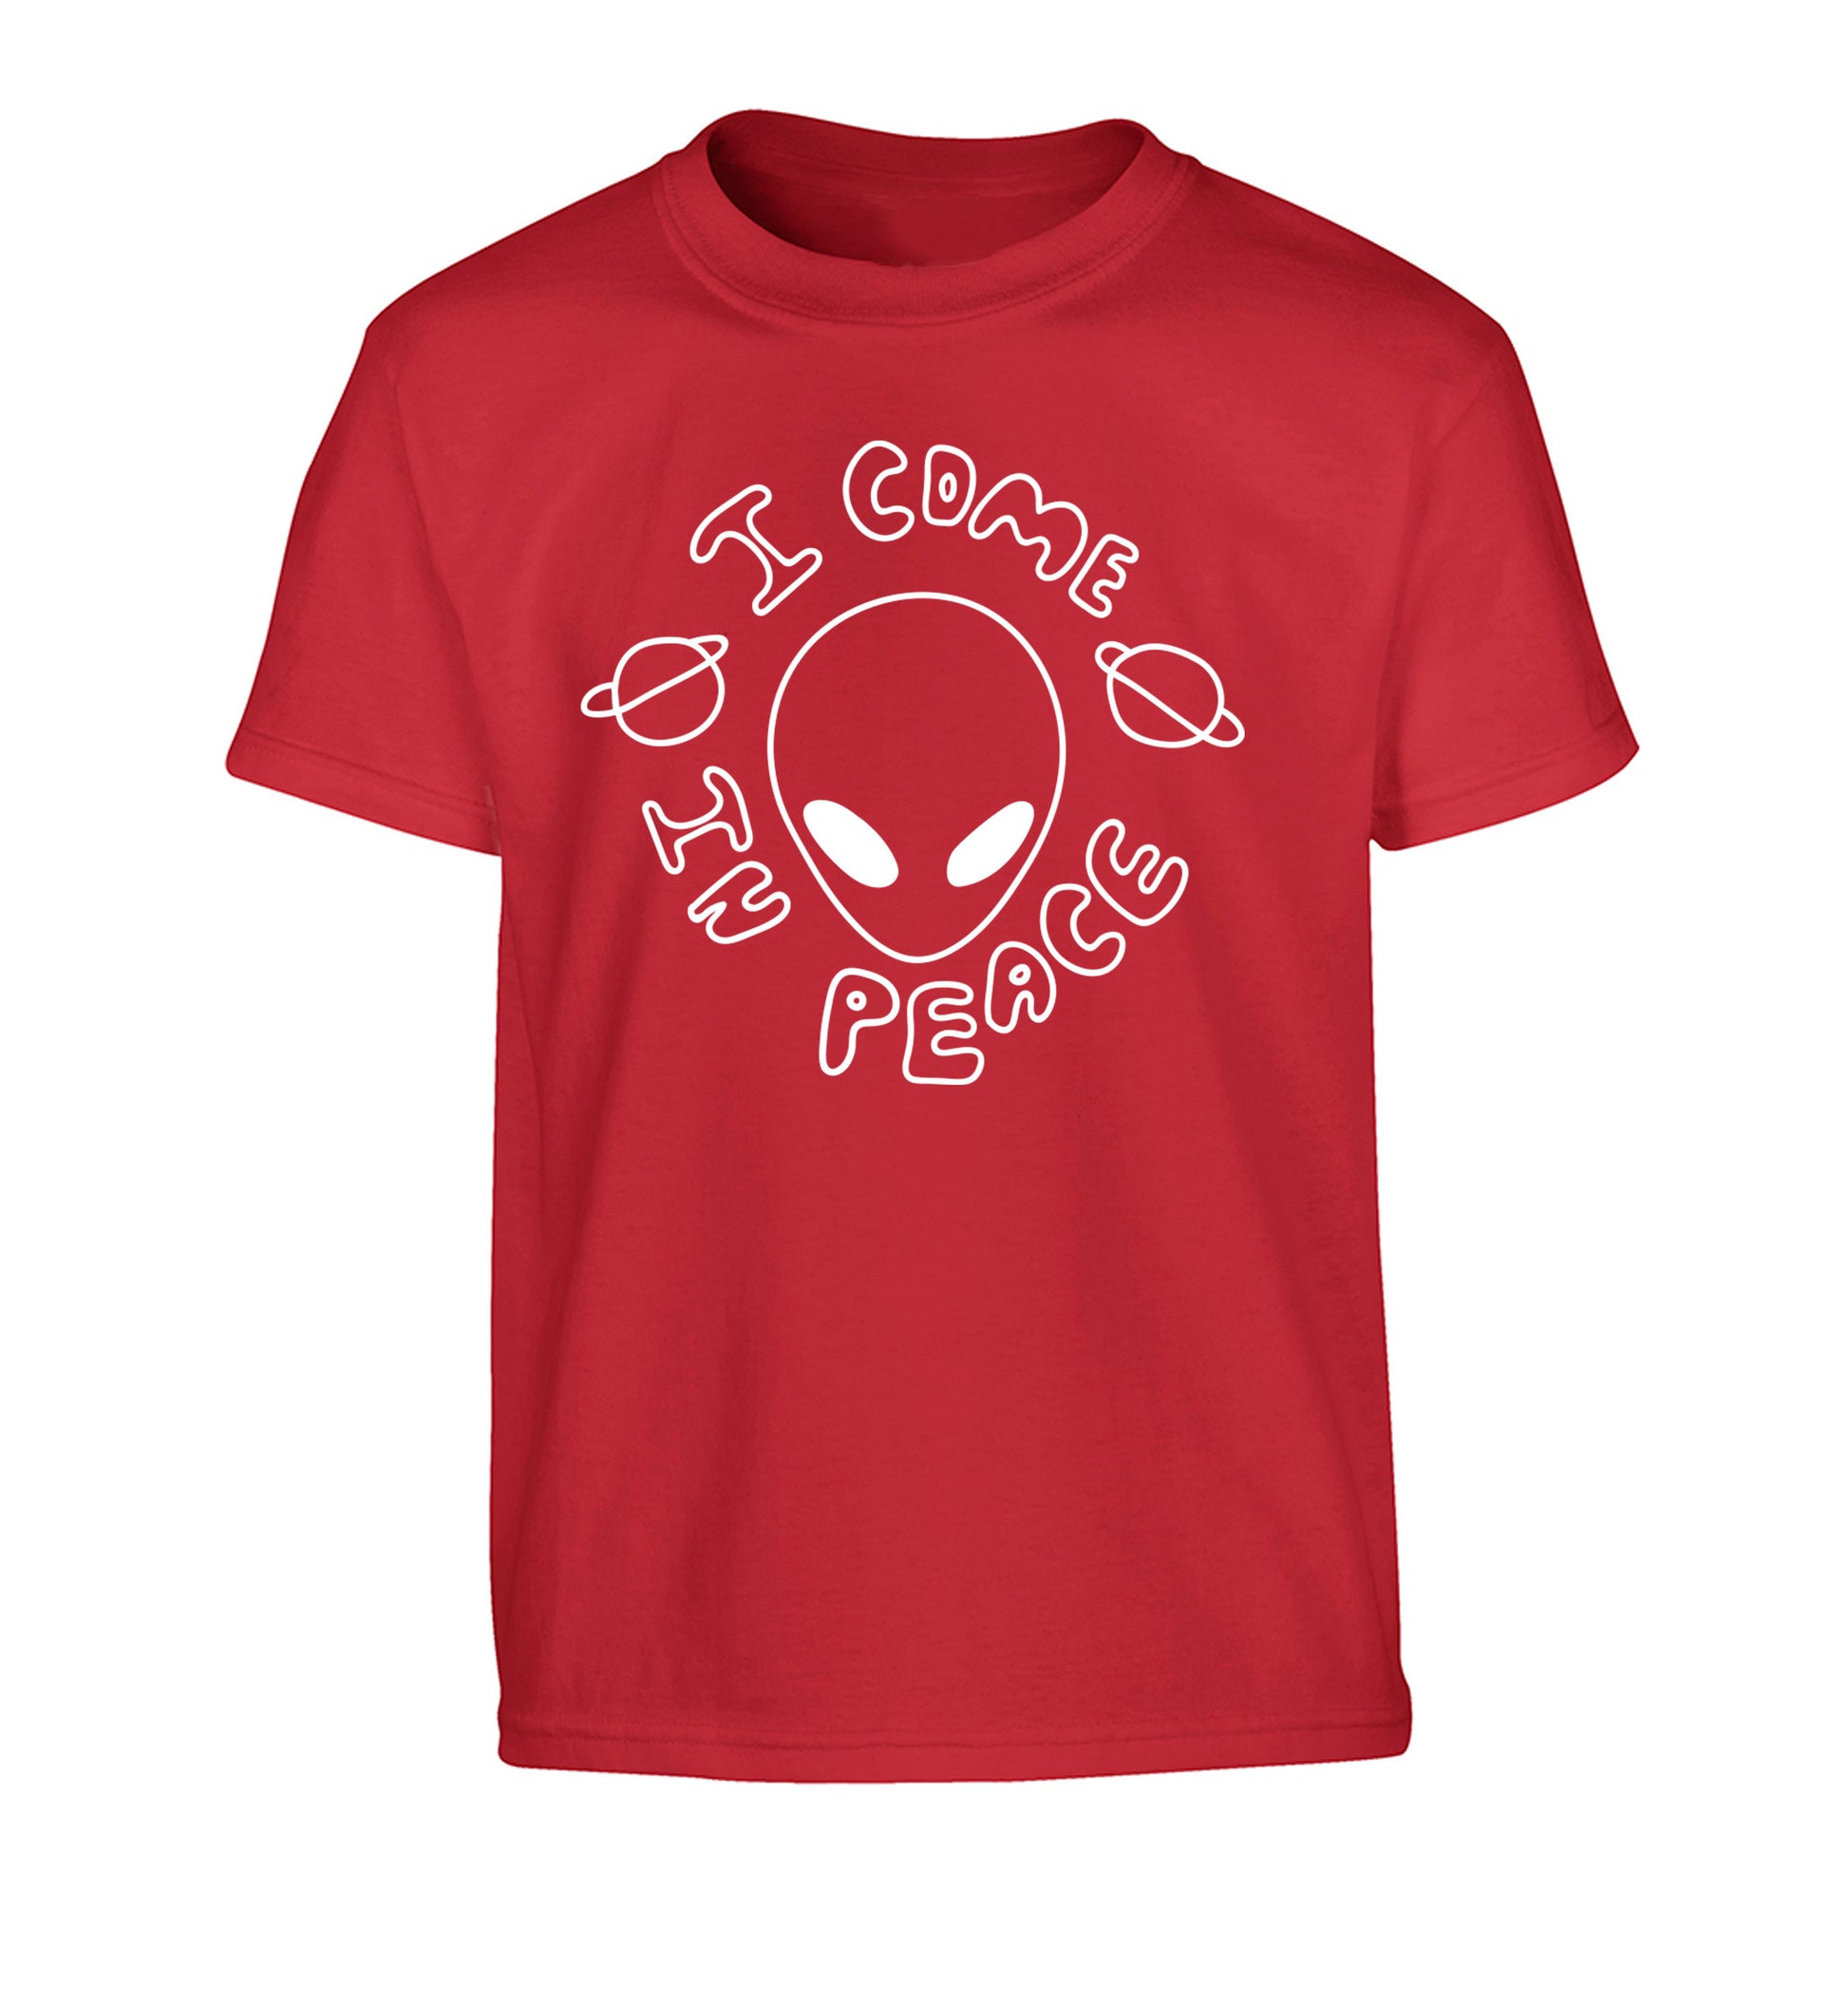 I come in peace Children's red Tshirt 12-14 Years